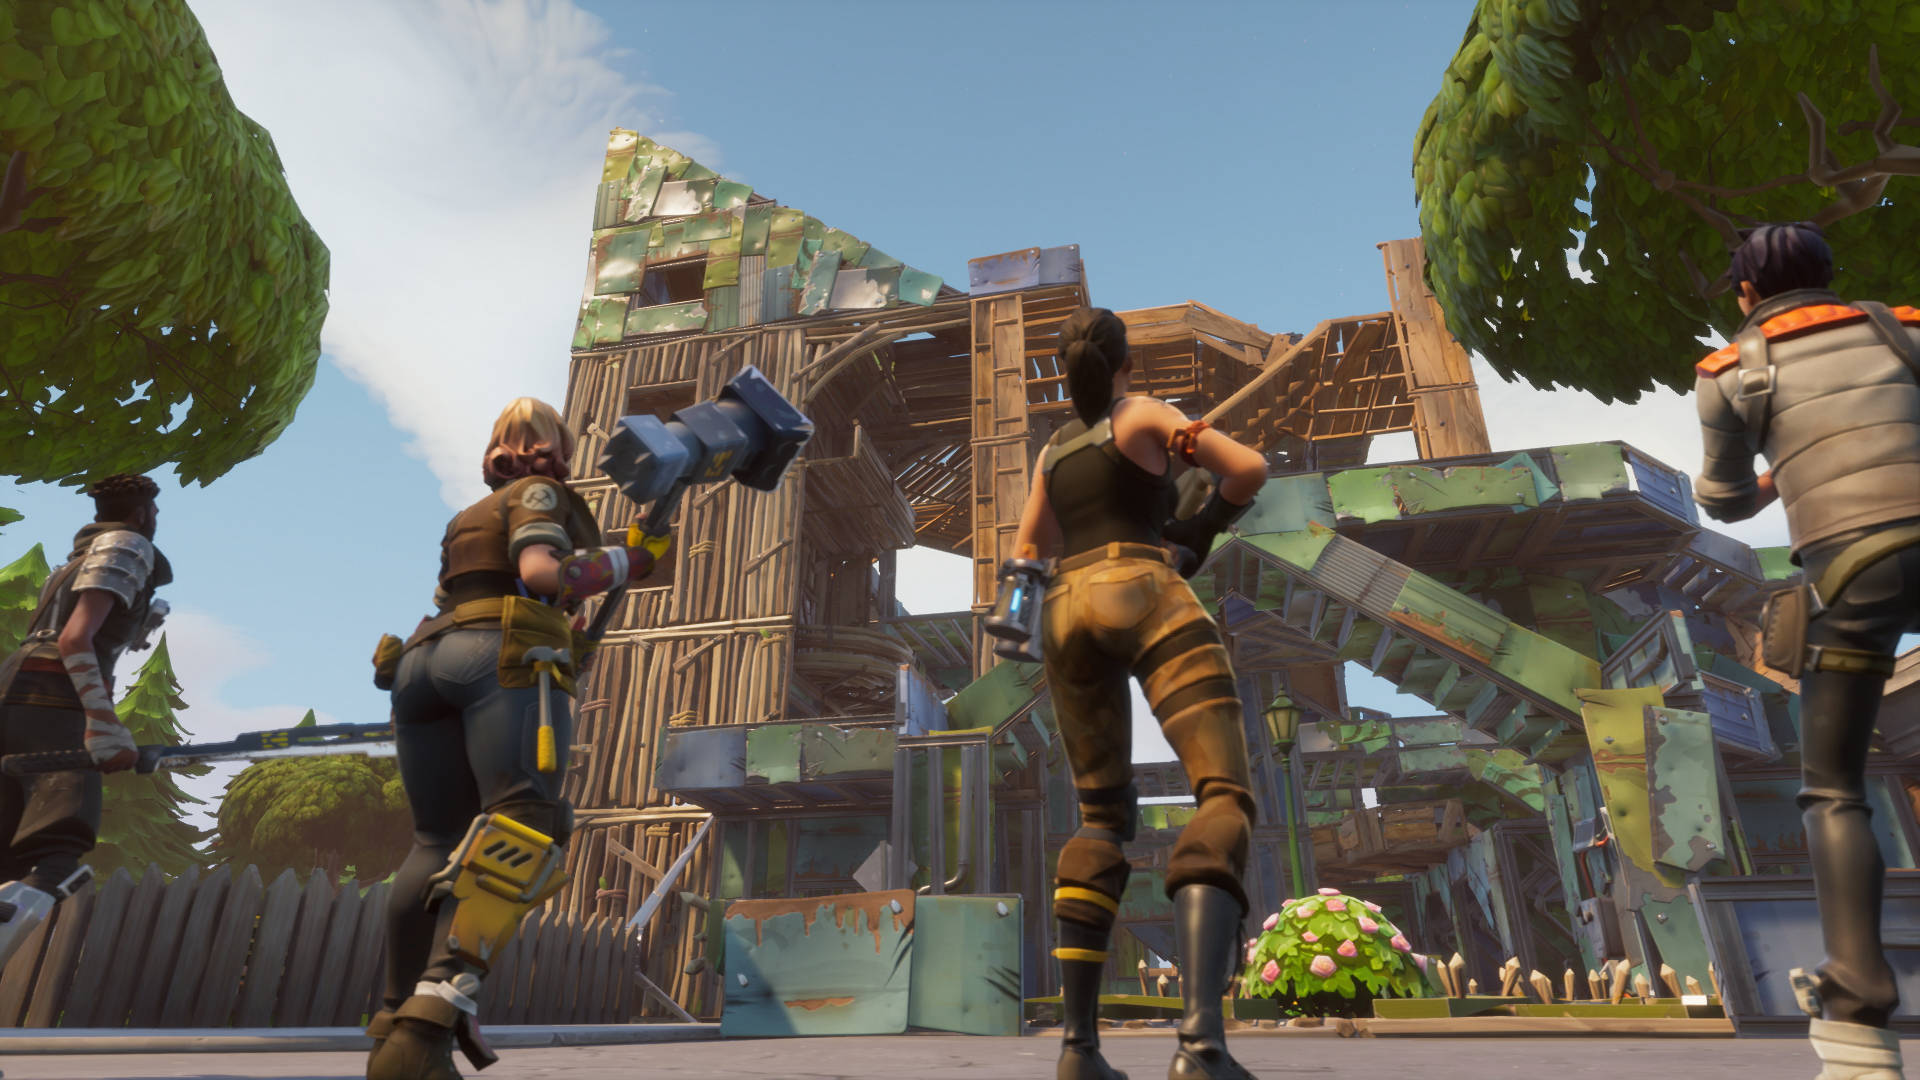 imspeedygonzales has created a practice course for building and editing in fortnite - fortnite edit course codes